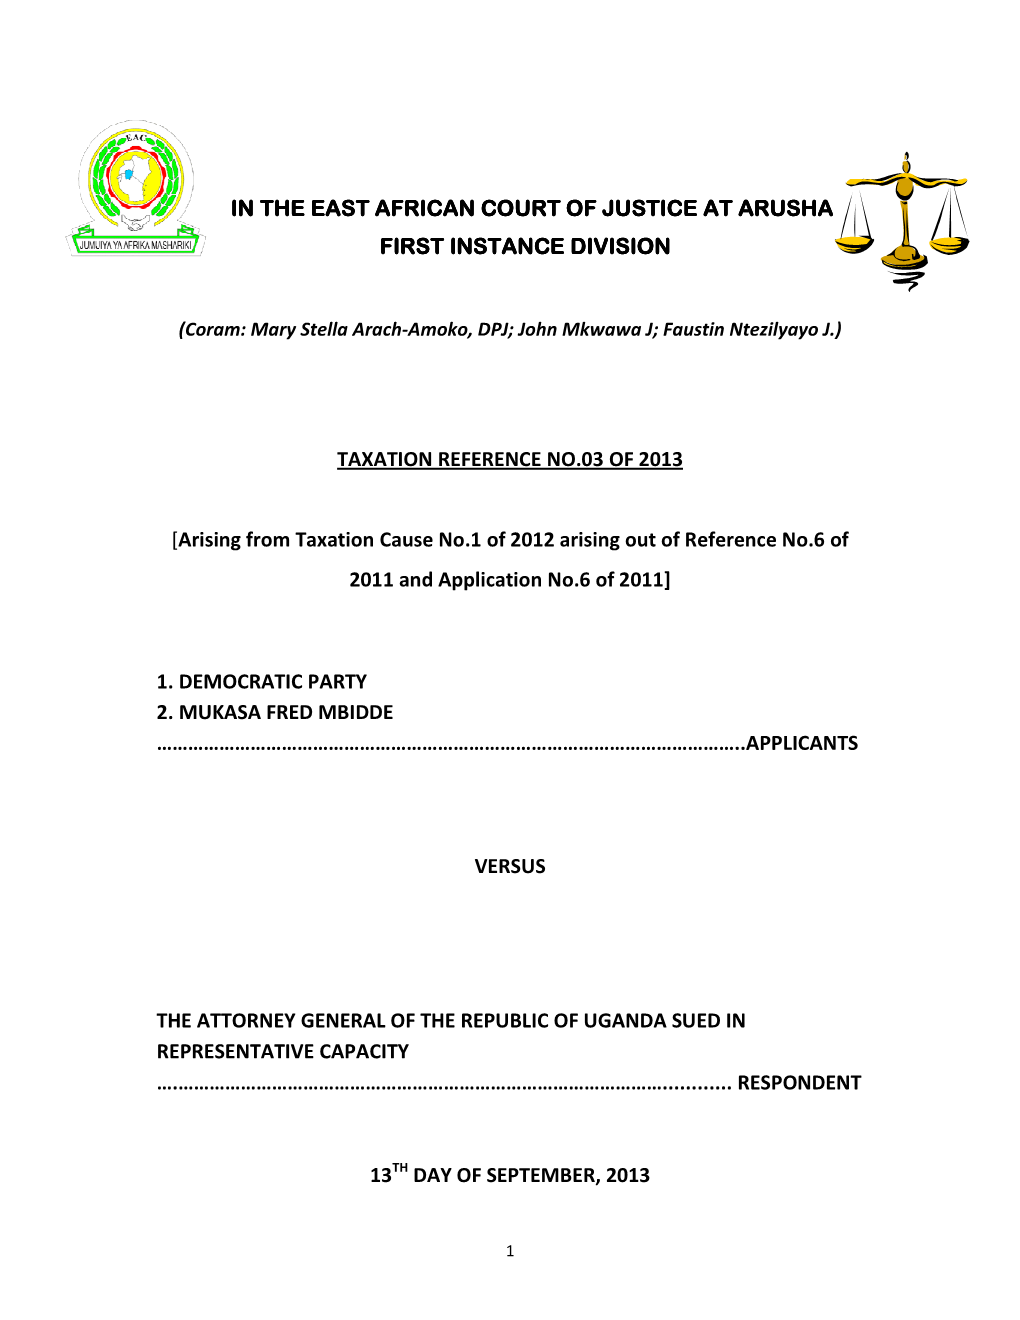 Democratic Party V. Attorney General of Uganda, Ruling, Tax. Ref. No. 3 of 2013, Cause No. 1 of 2012, Ref. No. 6 of 2011, Appl